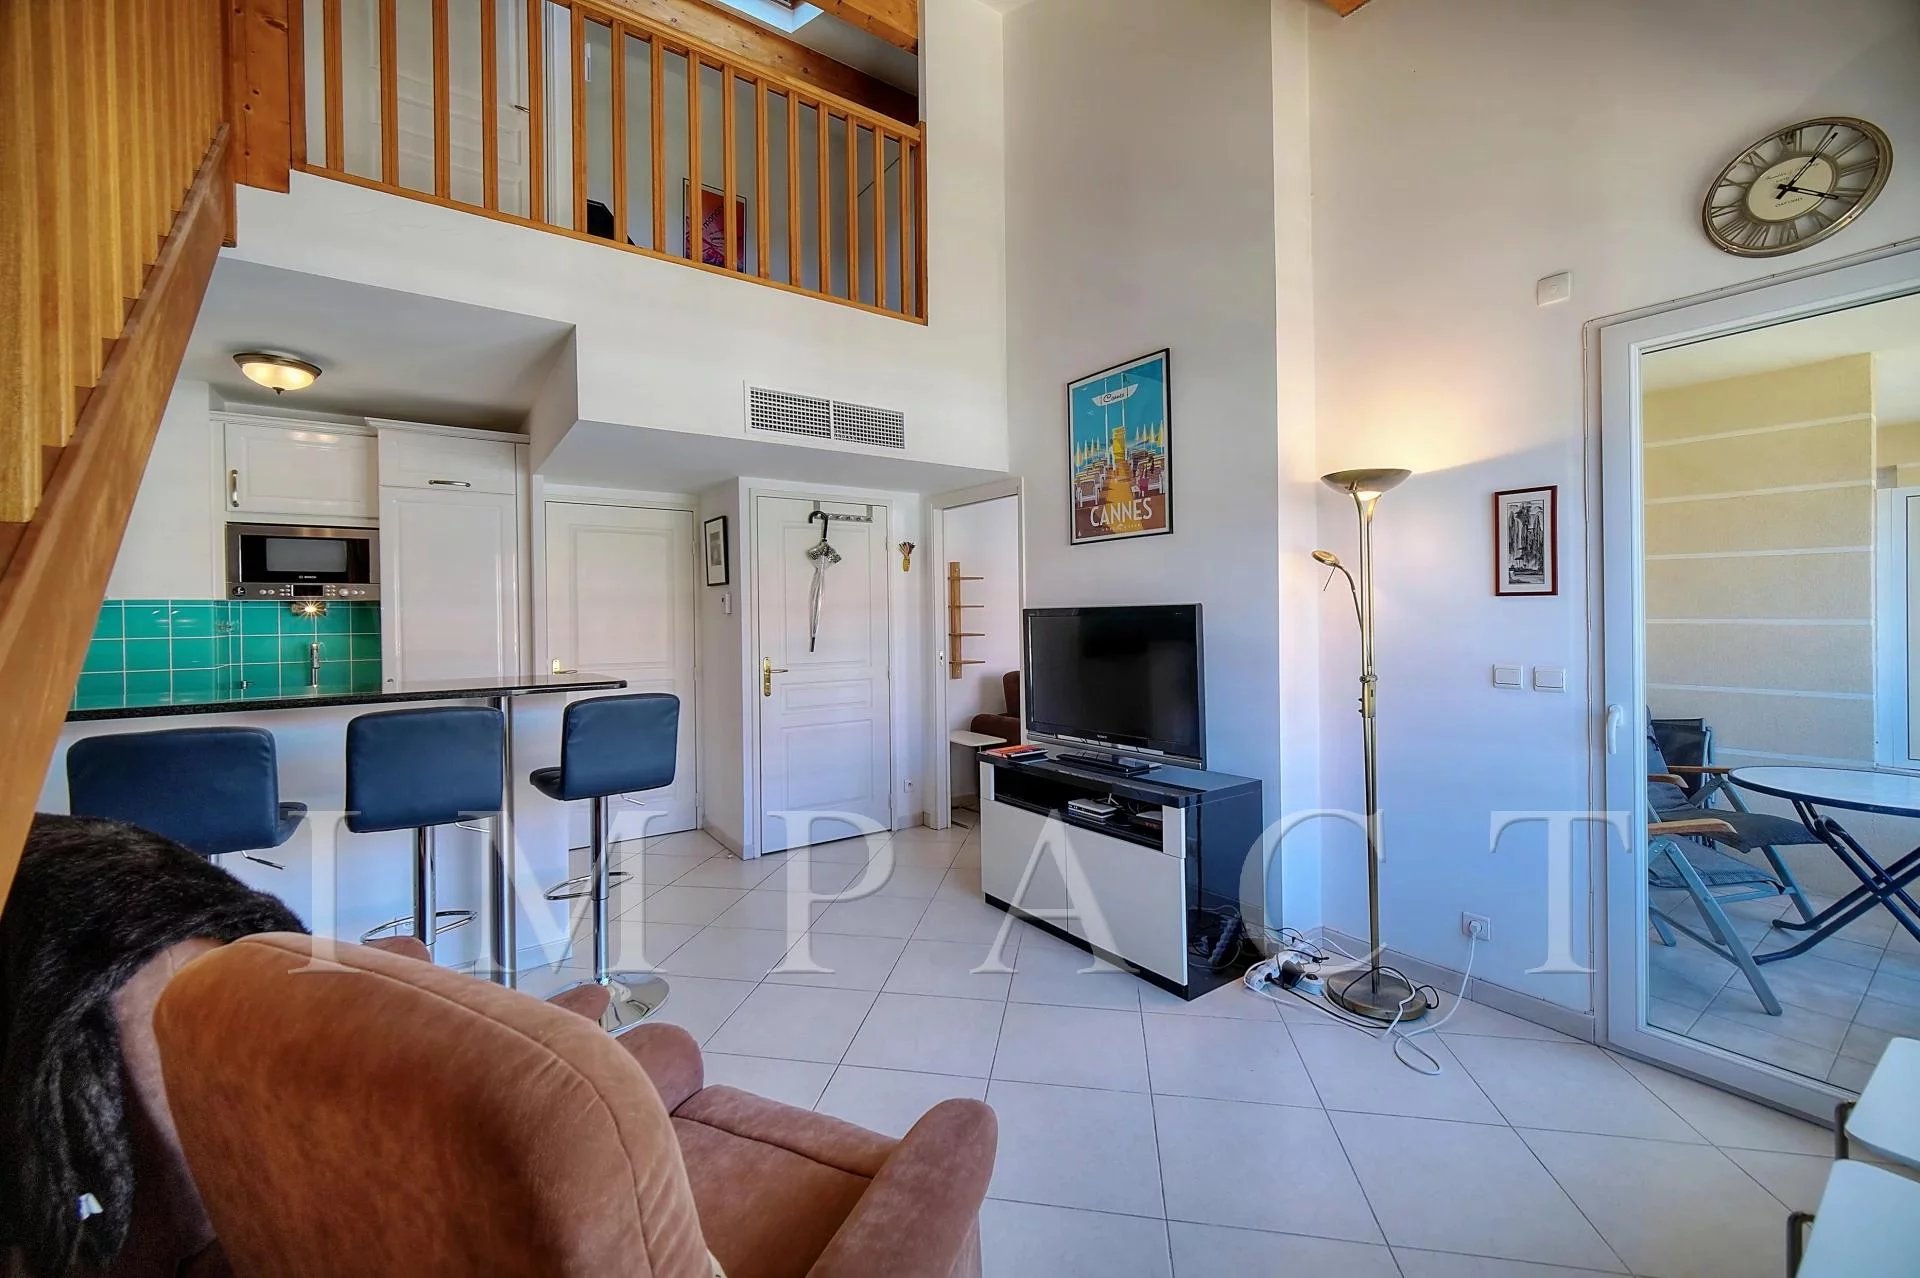 Cannes - Near the beach - Apartment for rent